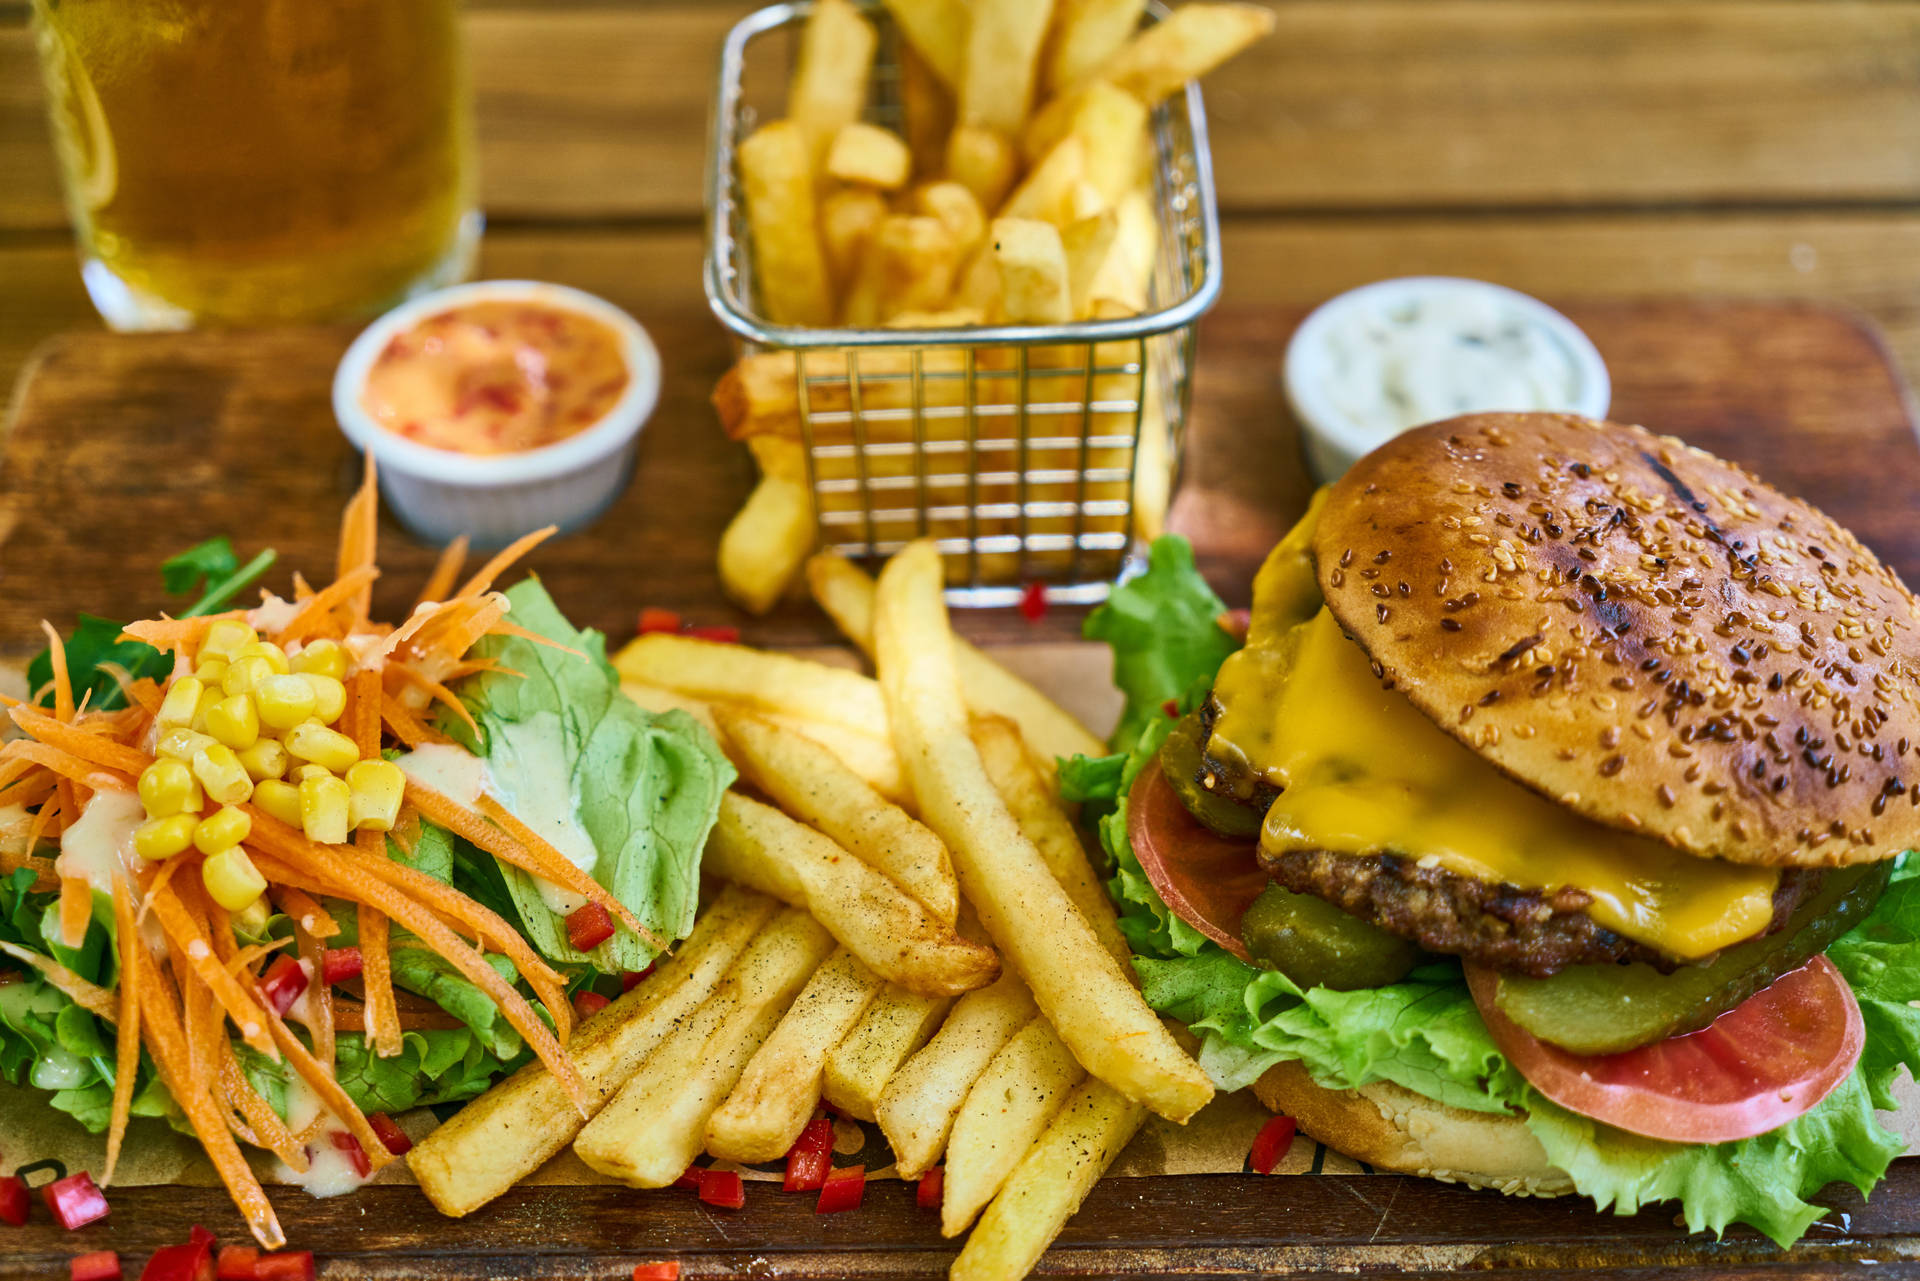 Burger, Fries, And Vegetables 2560x1440 Food Wallpaper